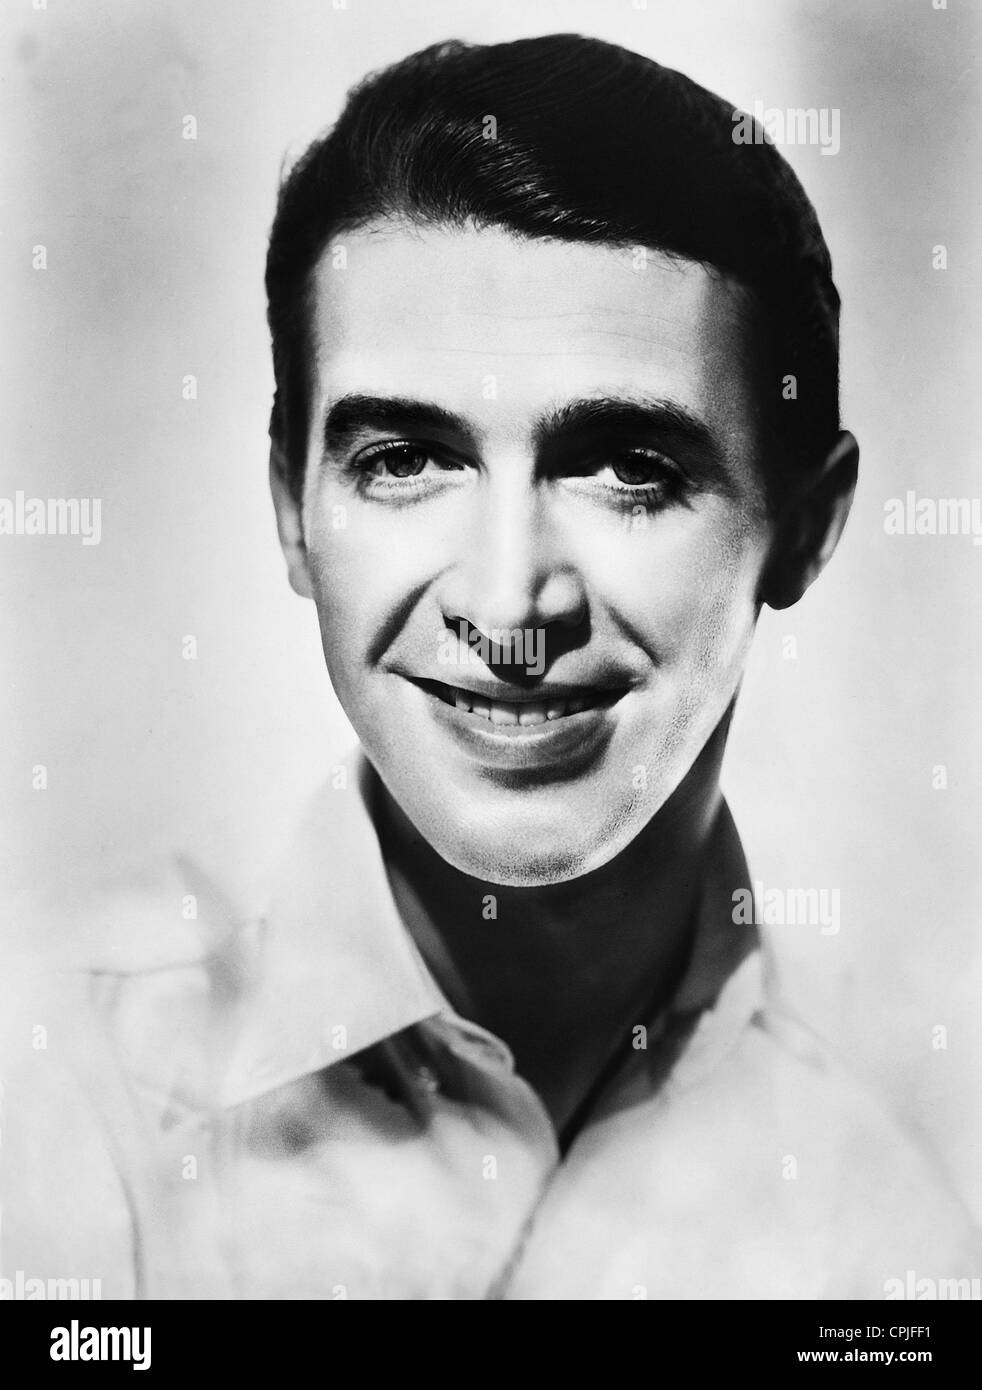 James Stewart in "Navy Blue and Gold", 1937 Stockfoto